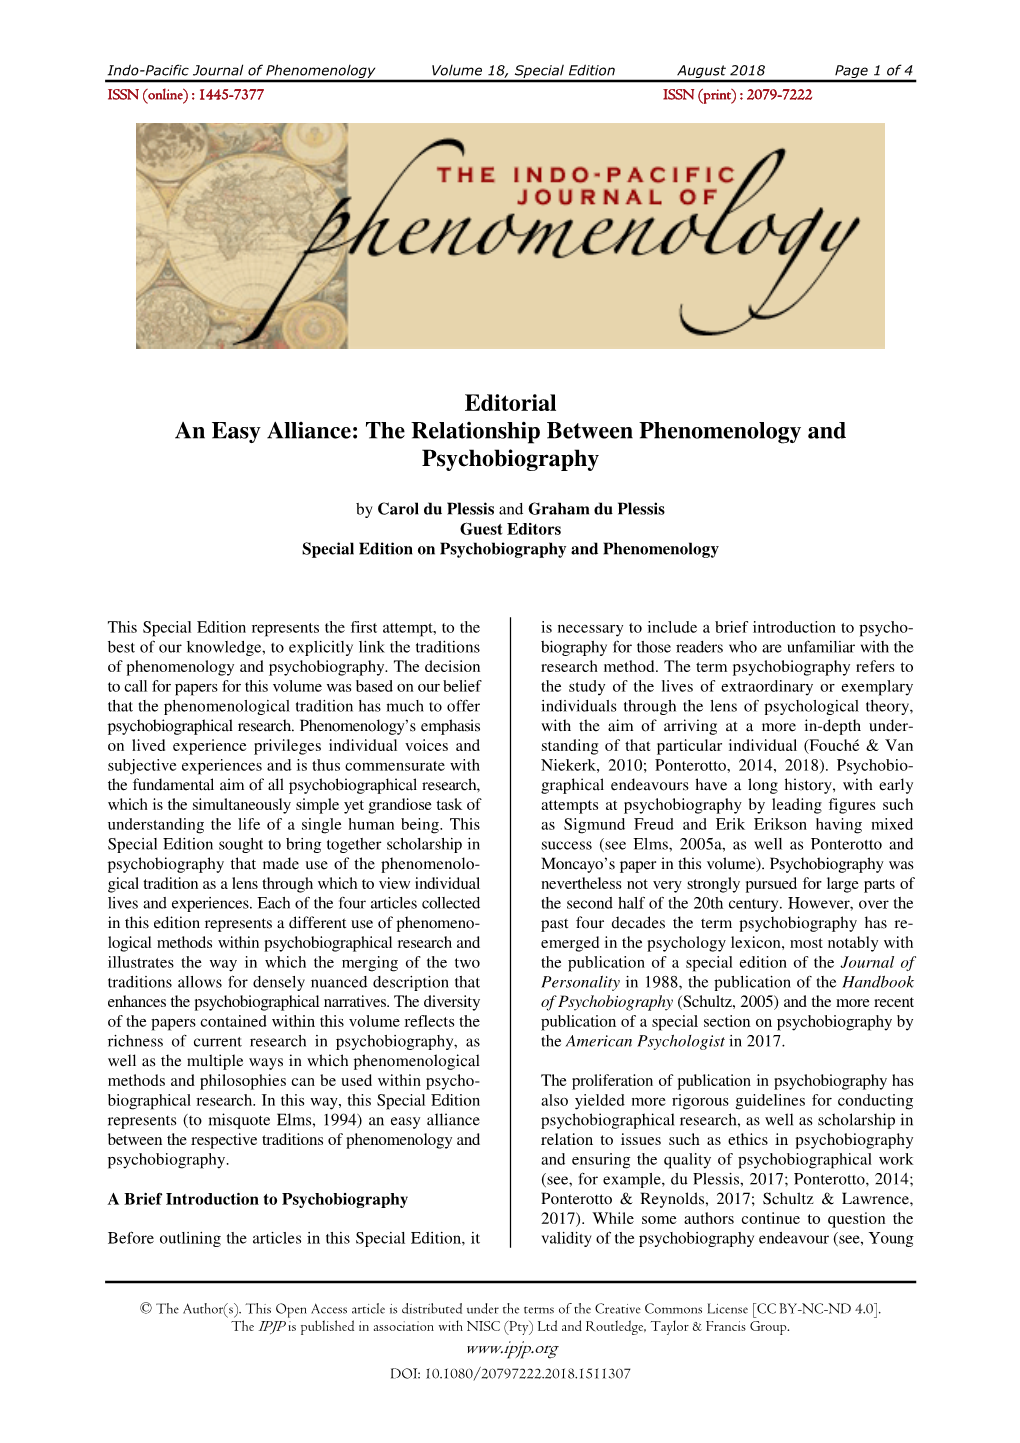 Editorial an Easy Alliance: the Relationship Between Phenomenology and Psychobiography